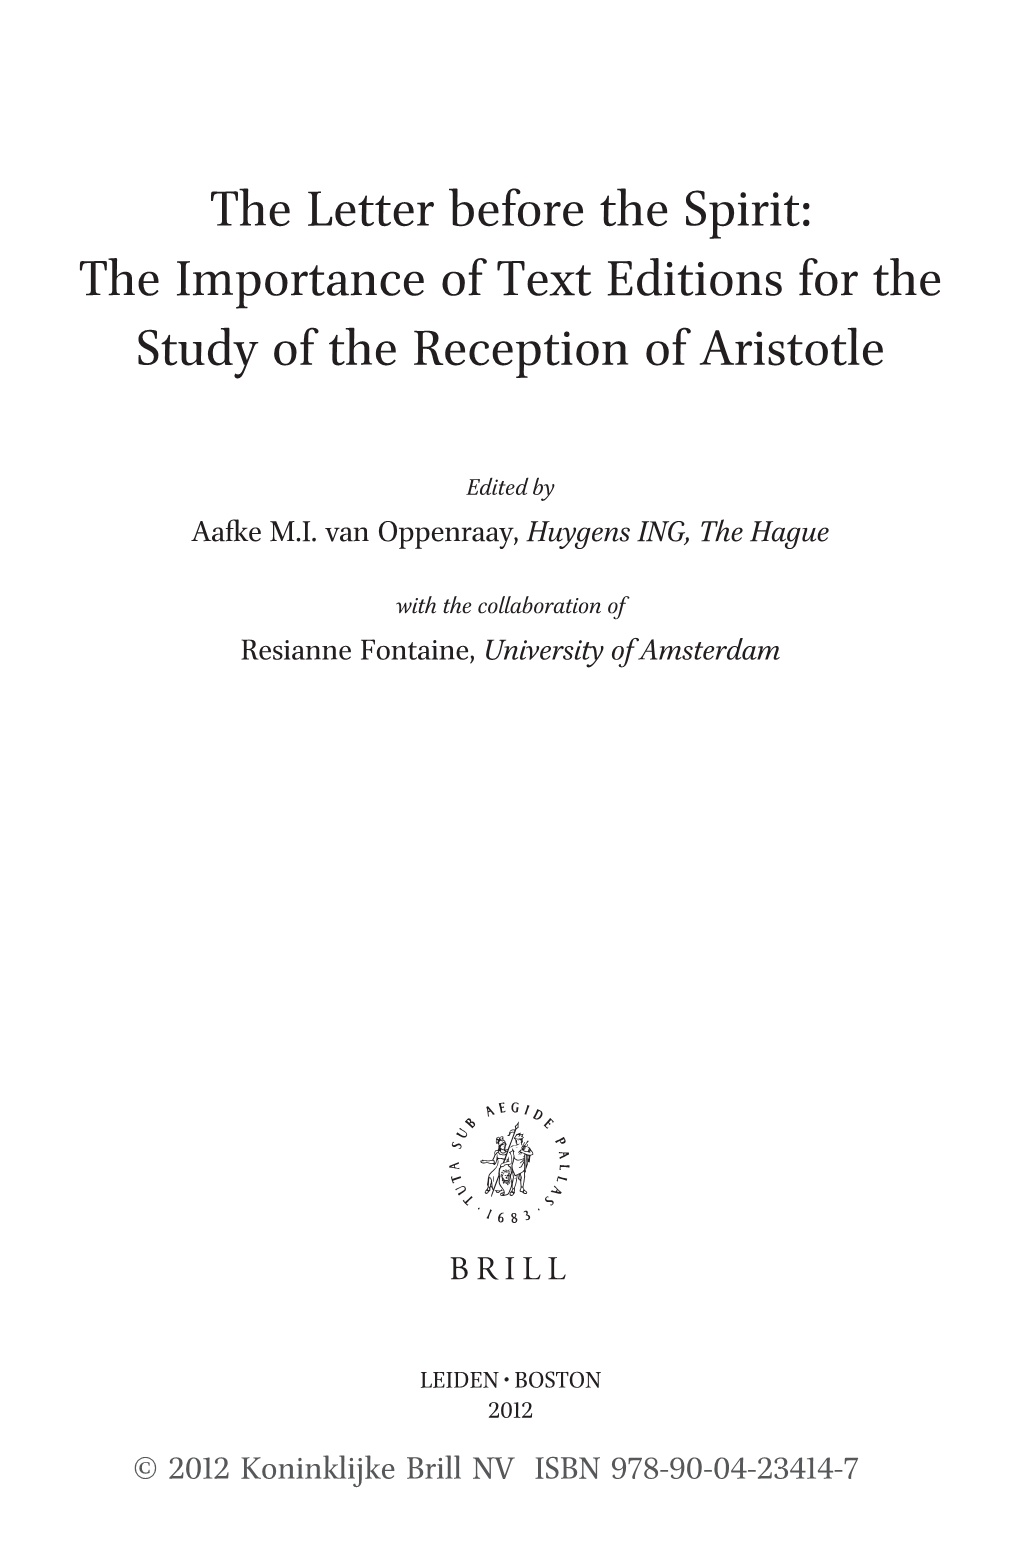 The Letter Before the Spirit: the Importance of Text Editions for the Study of the Reception of Aristotle